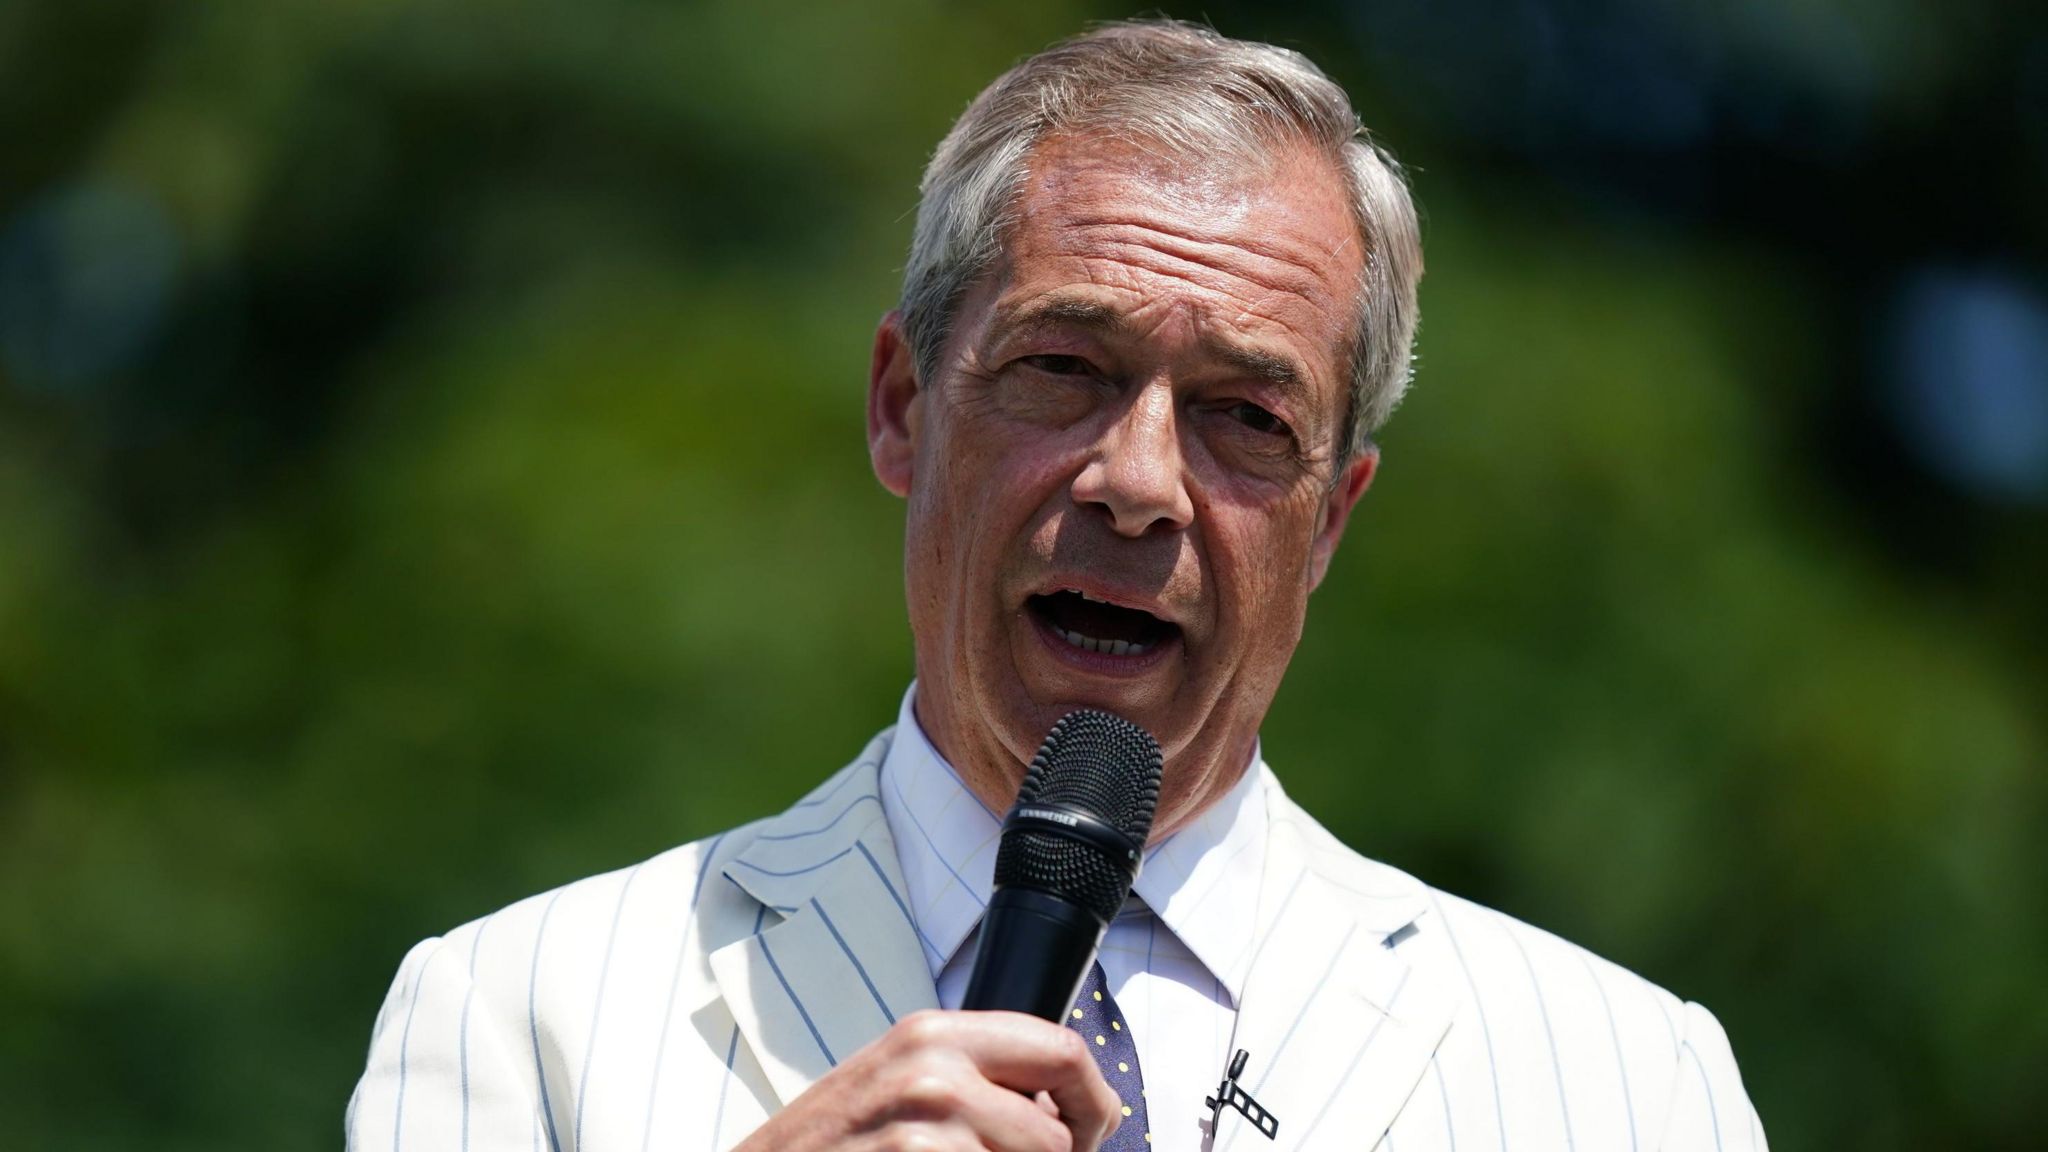 Nigel Farage, wearing a white jacket with blue stripes, speaking into a microphone